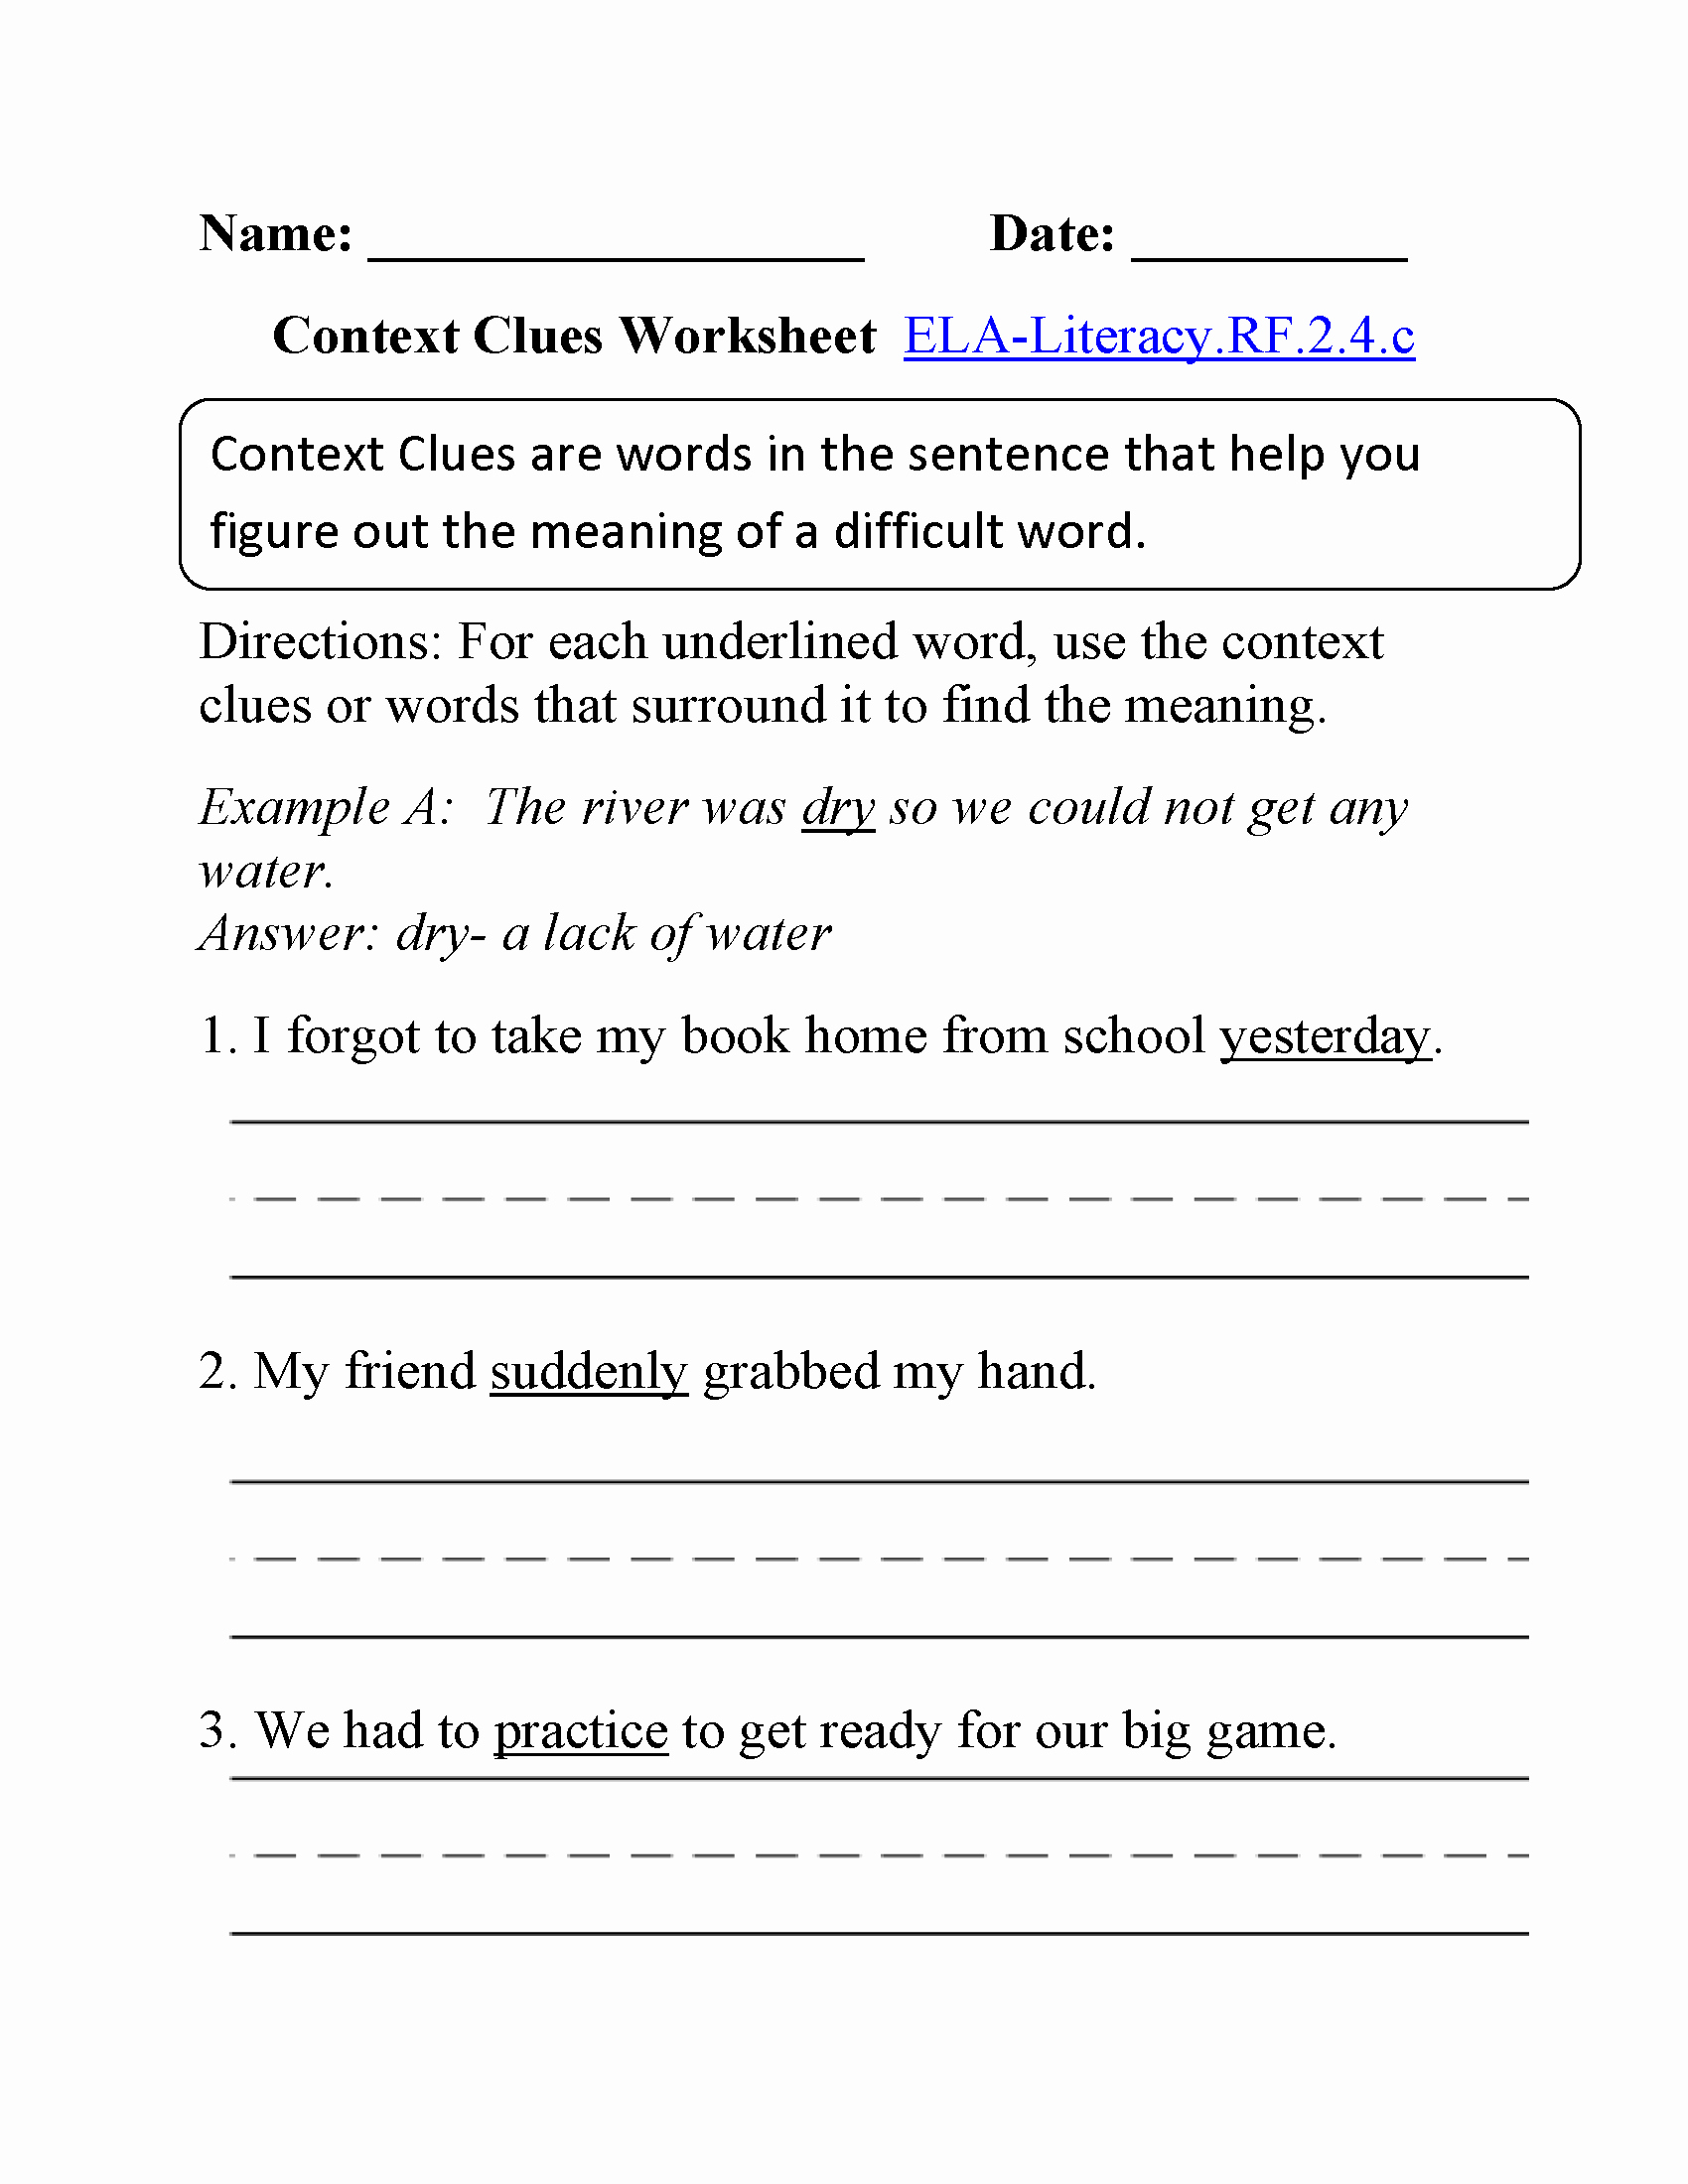 Context Clues Worksheets Second Grade Luxury 2nd Grade Mon Core